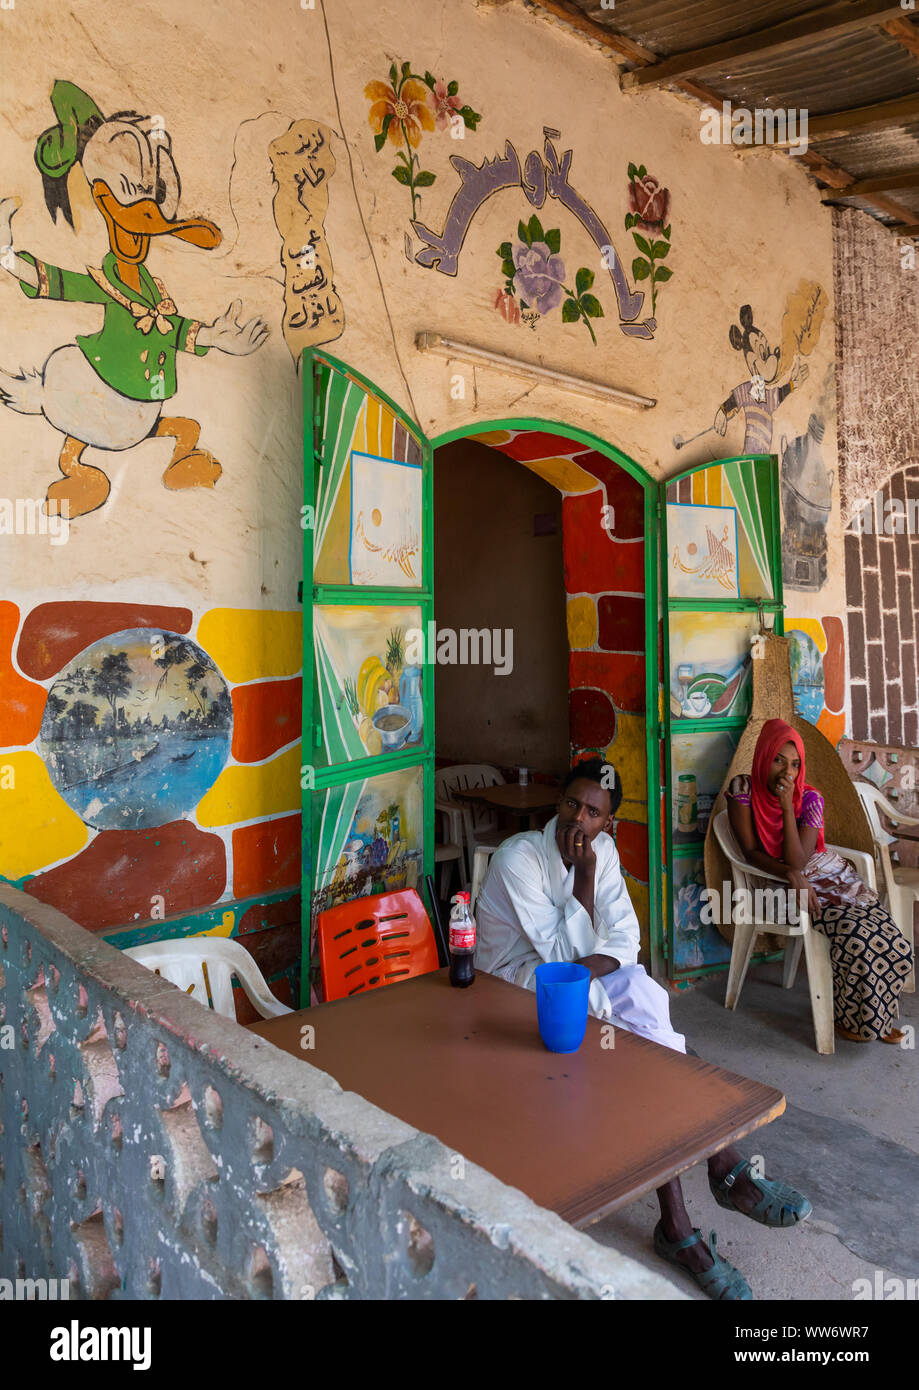 Eritrean people in a bar decorated with disney characters, Gash-Barka, Agordat, Eritrea Stock Photo